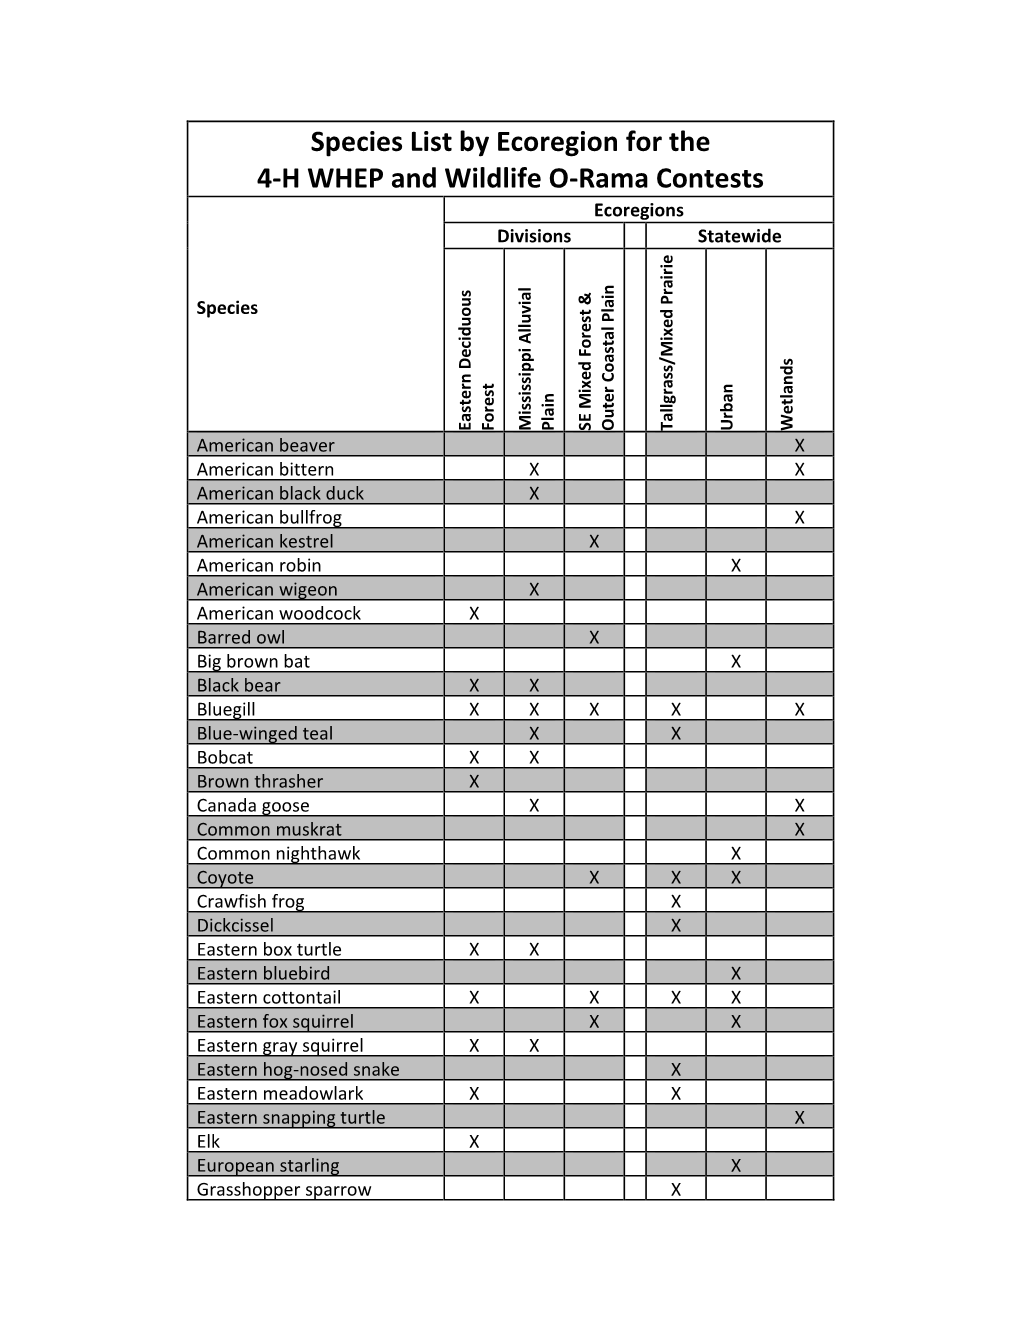 Species List by Ecoregion for the 4-H WHEP and Wildlife O-Rama Contests Ecoregions Divisions Statewide